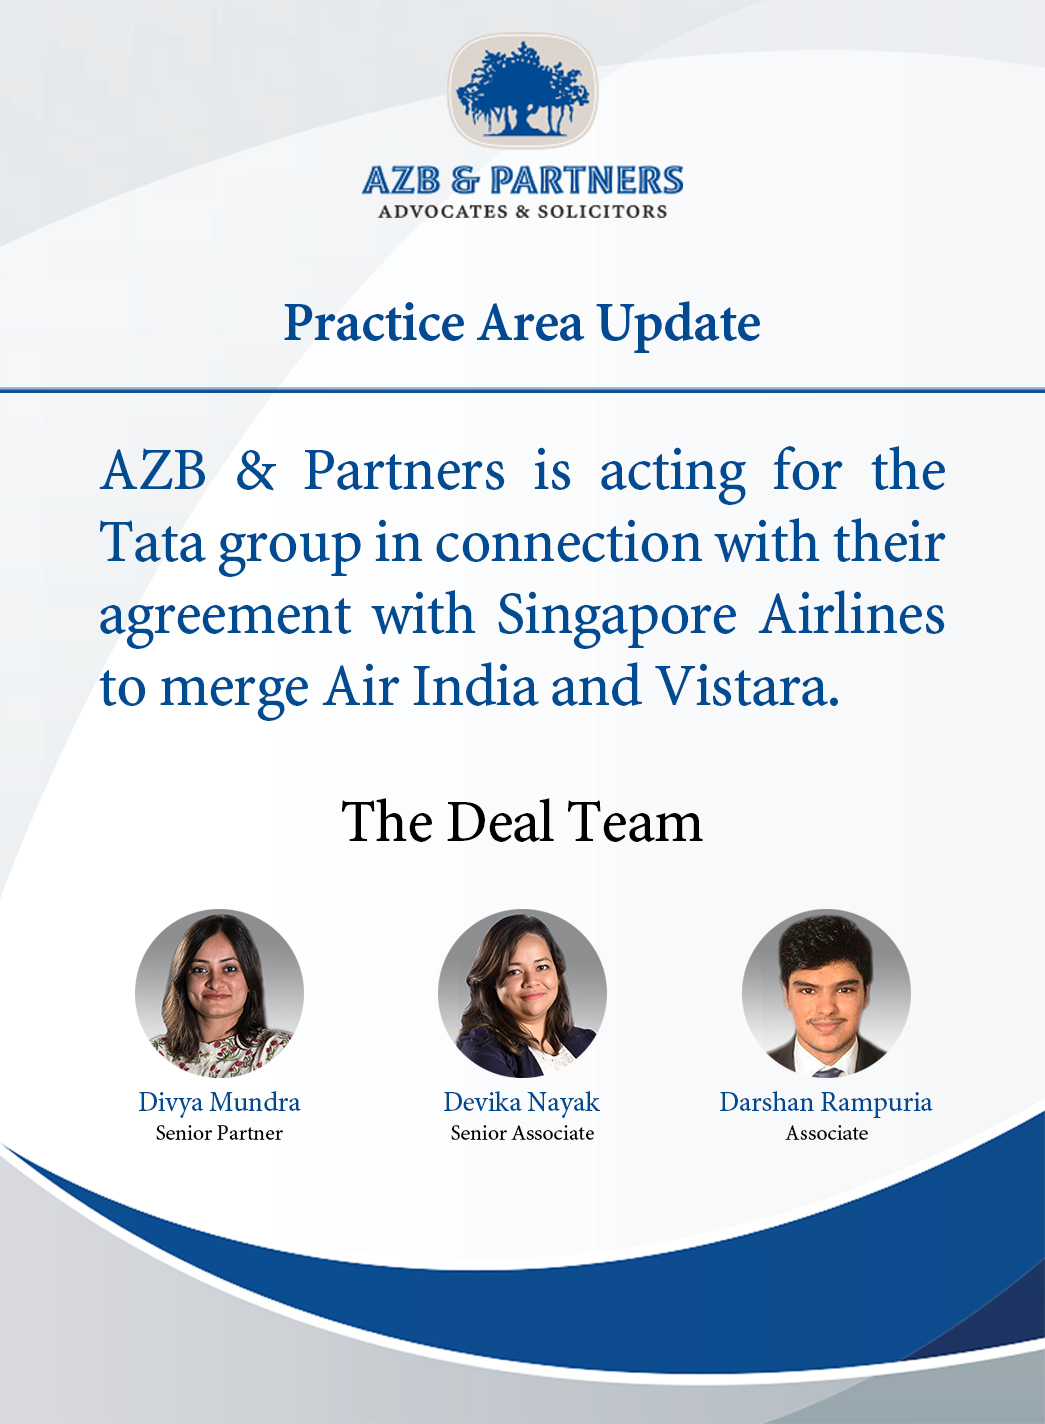 Practice-area-update-Tata-group-Singapore-Airlines-finalise-merger-of-Air-India-and-Vistara.jpg